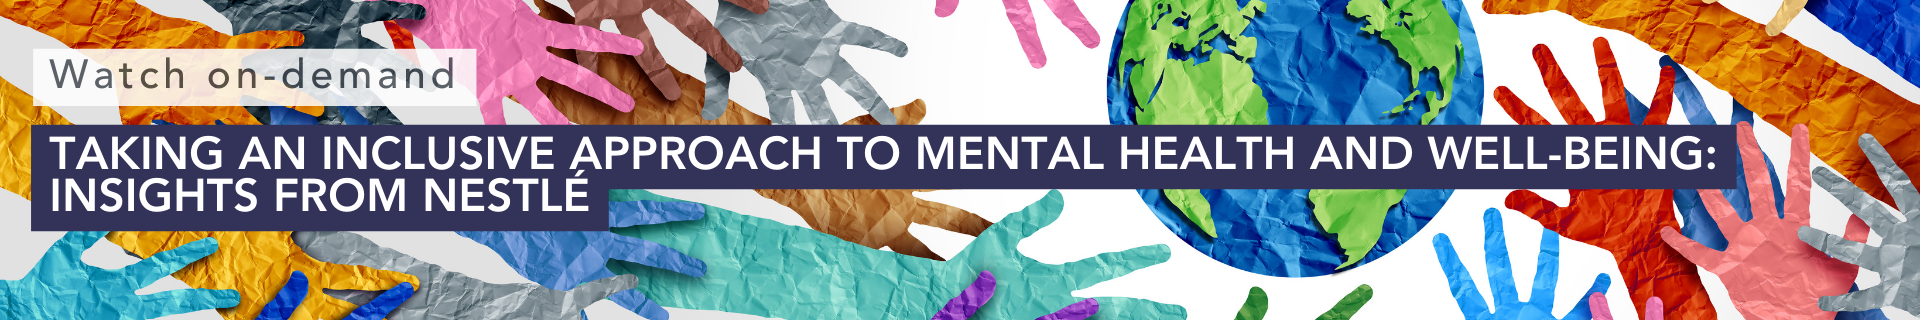 Taking An Inclusive Approach To Mental Health And Well-Being